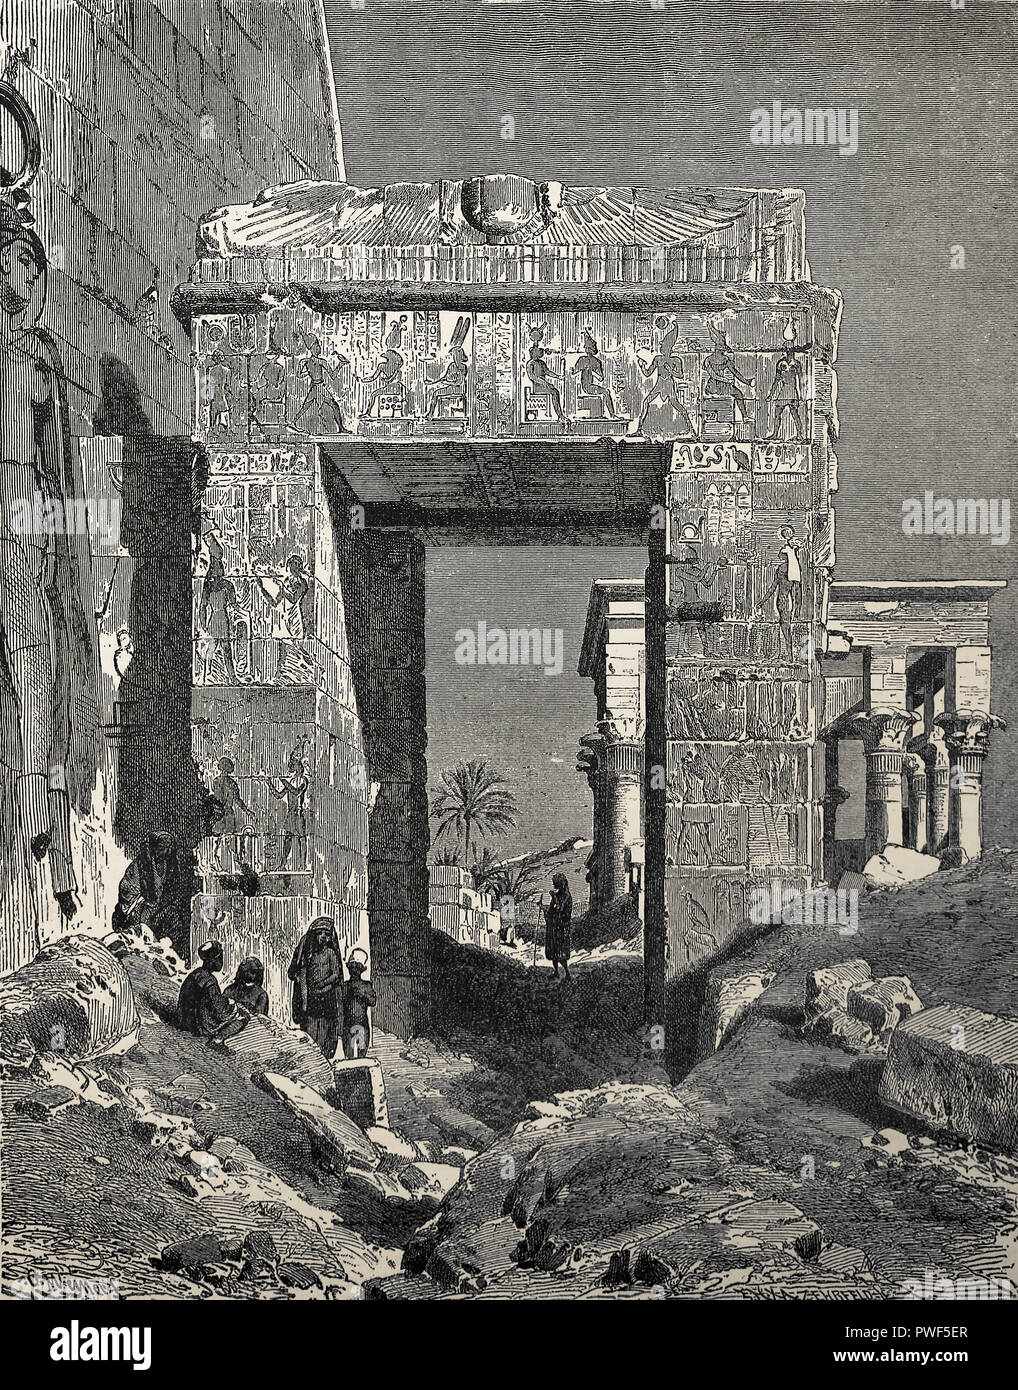 Ruins of the temple of Isis in Philae, Egypt. 19th century. Based in a watercolour by Carl Werner (1808-1894). Engraving around 1865. Stock Photo